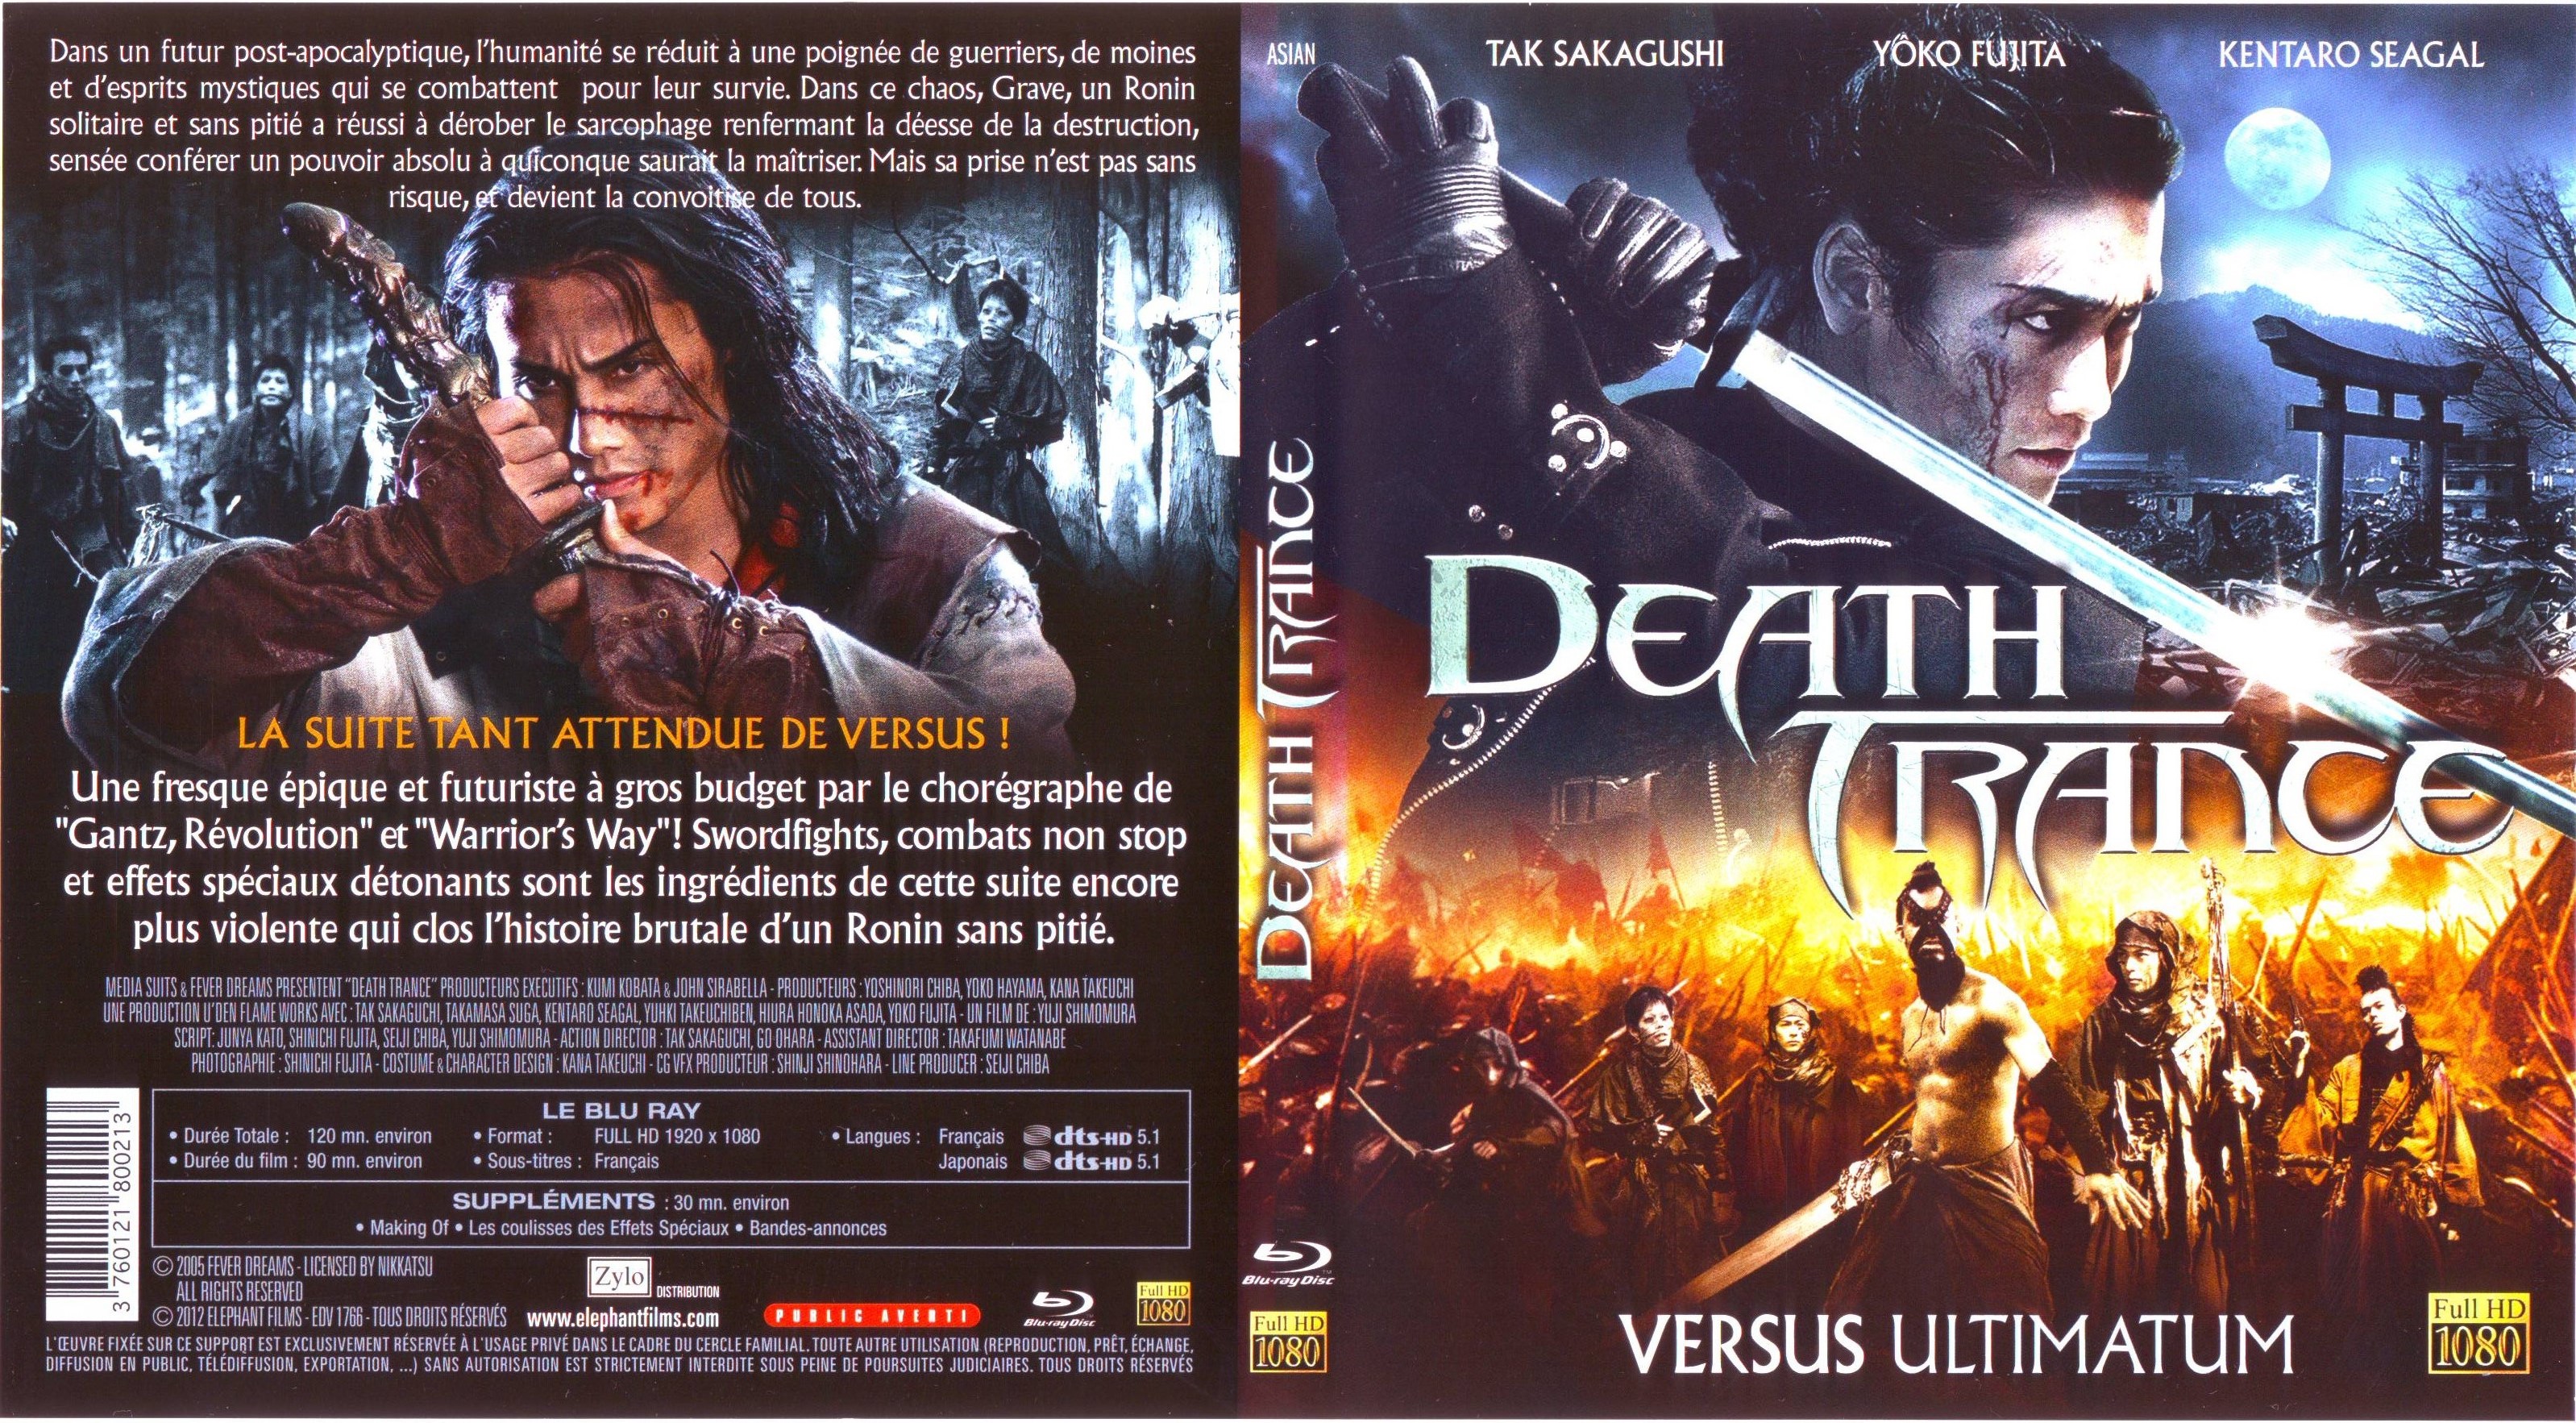 Jaquette DVD Death trance (BLU-RAY)